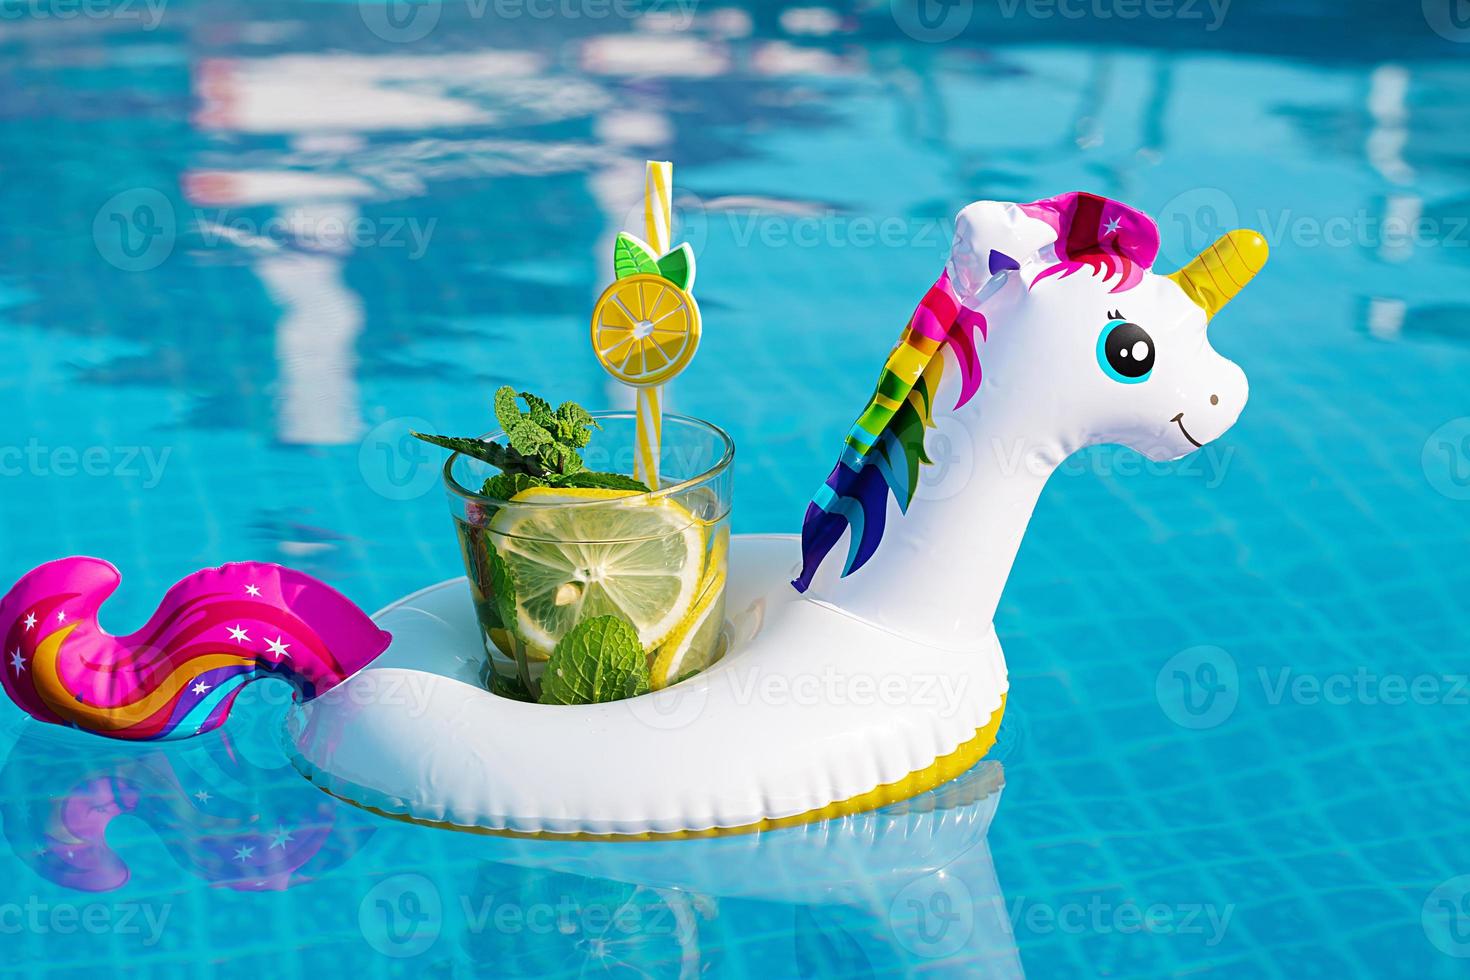 Fresh coctail mojito on inflatable white unicorn toy at swimming pool. Vacation concept. photo